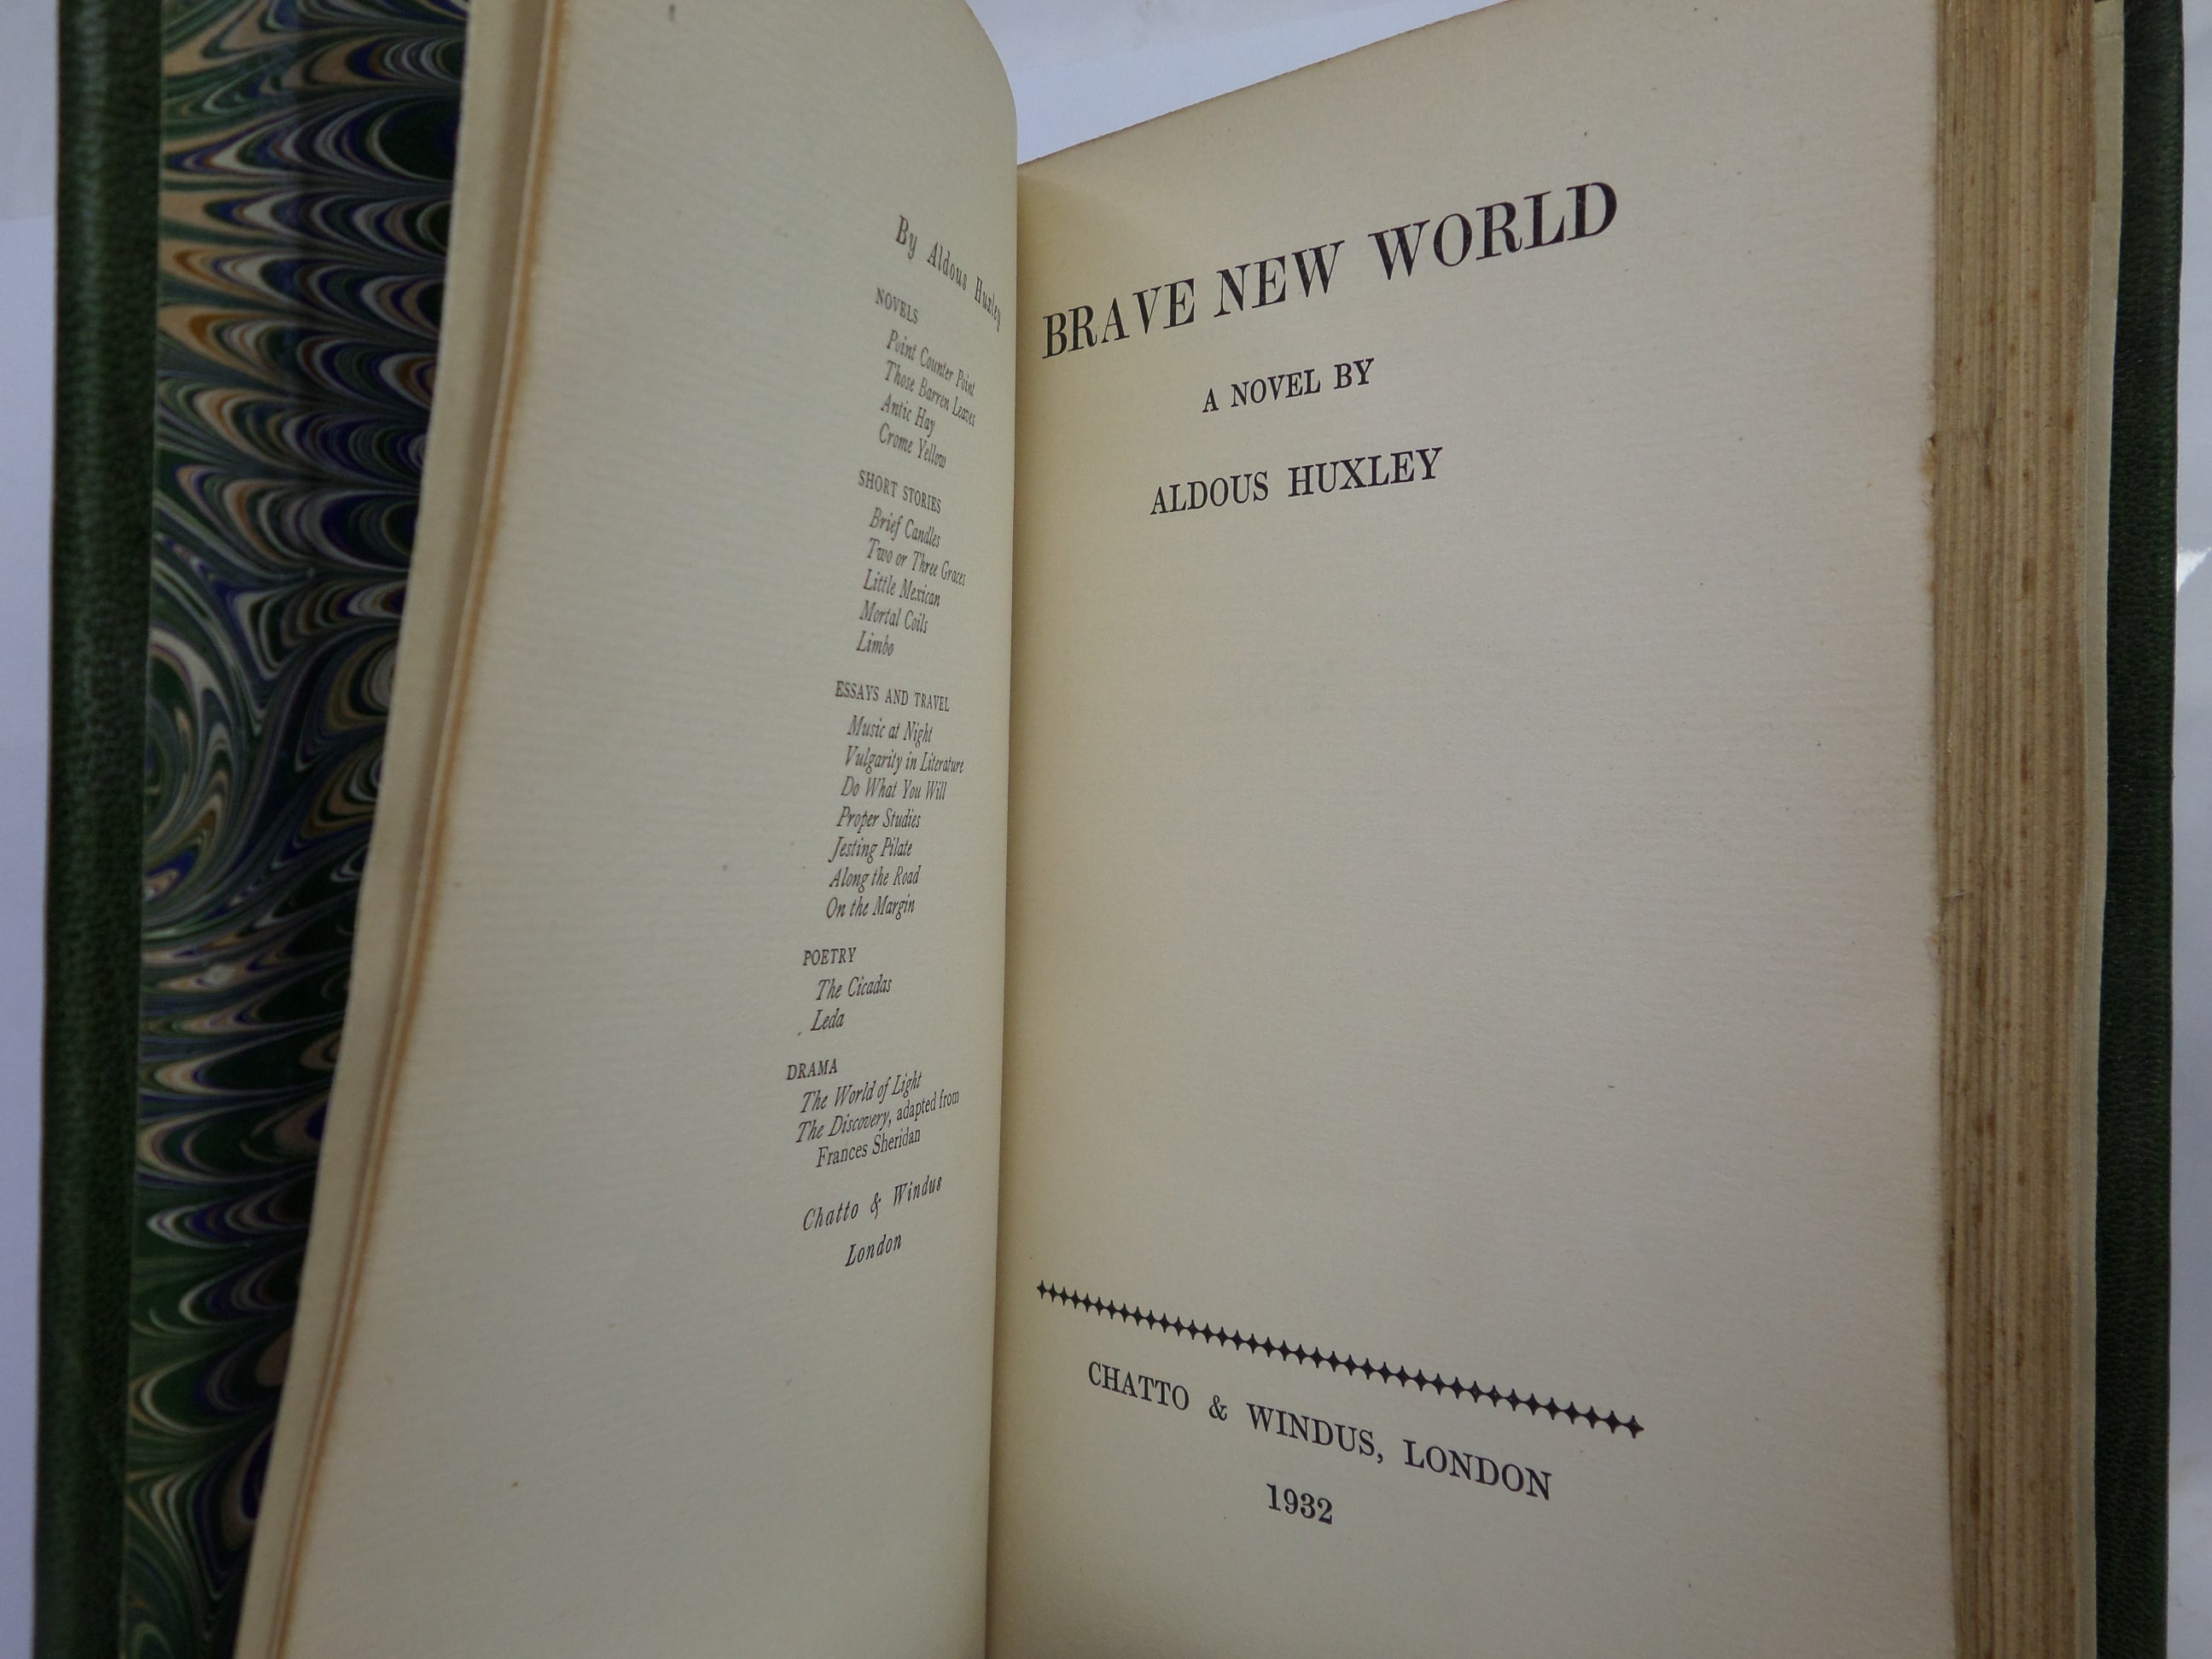 BRAVE NEW WORLD BY ALDOUS HUXLEY 1932 FIRST EDITION, FINE BINDING